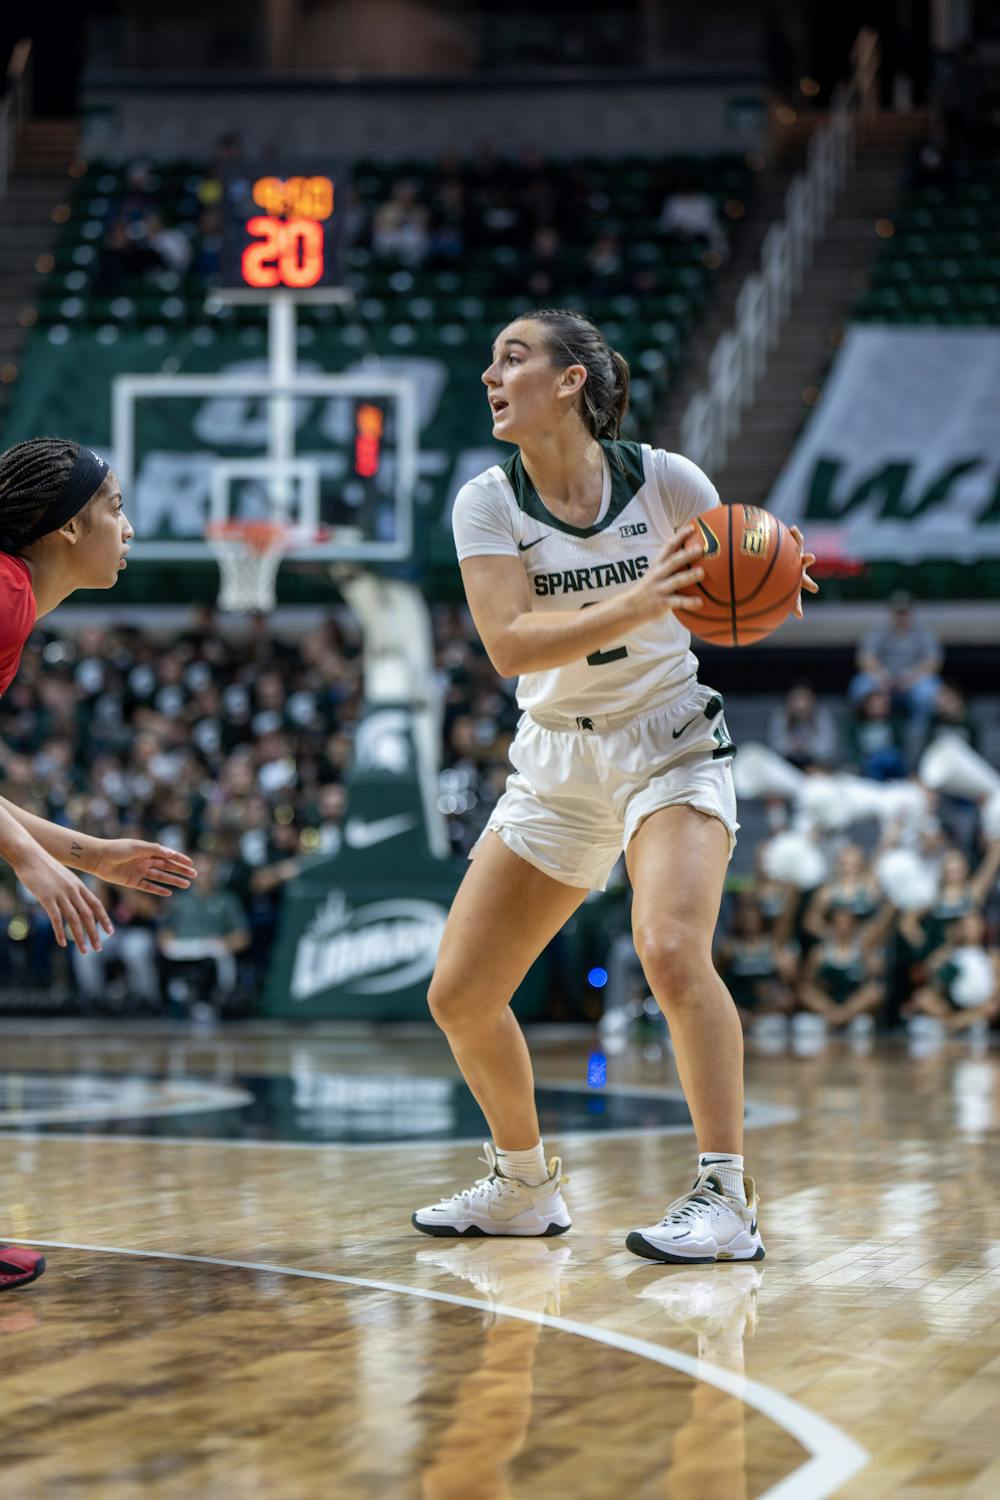 <p>Freshman guard Abbey Kimball handles the ball during the MSU v. Rutgers game held at the Breslin Center on Jan. 22, 2023. The Spartans won against Rutgers 85-63.</p>